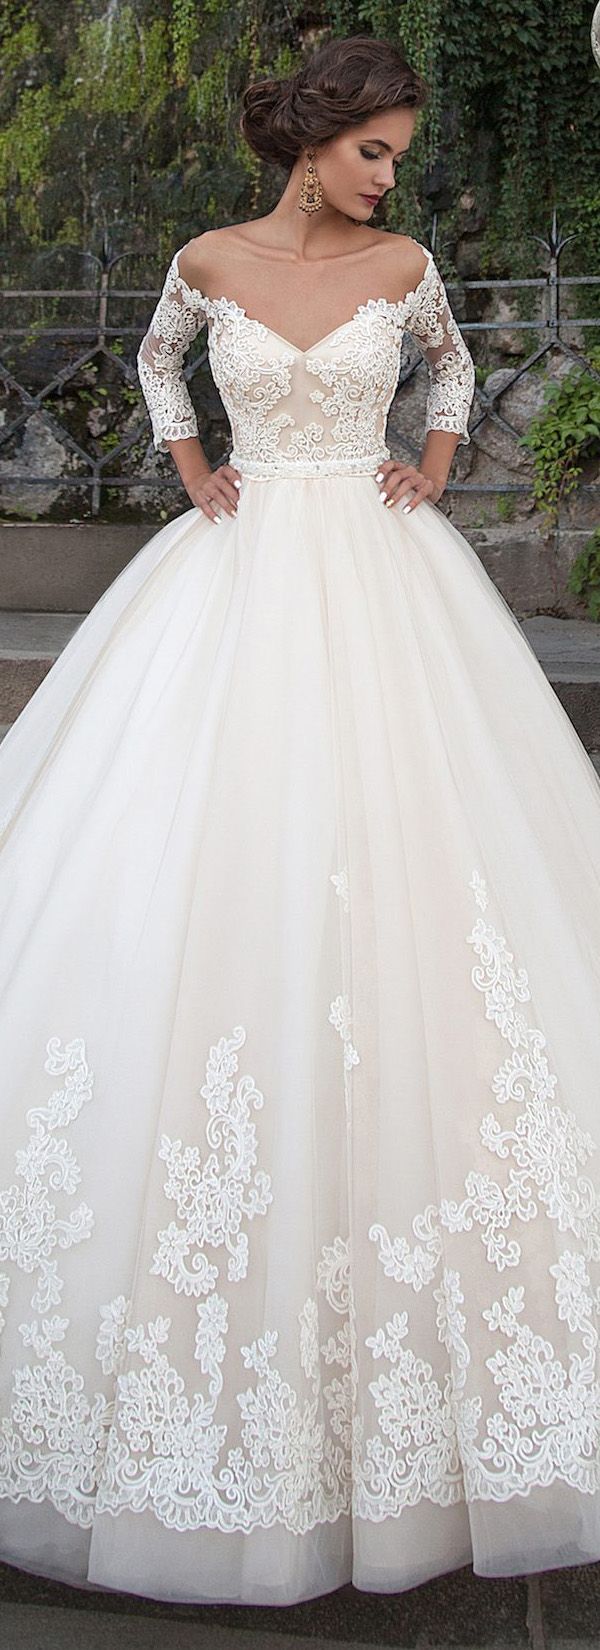 Mexican Wedding Dresses: Perfect piece of elegant style